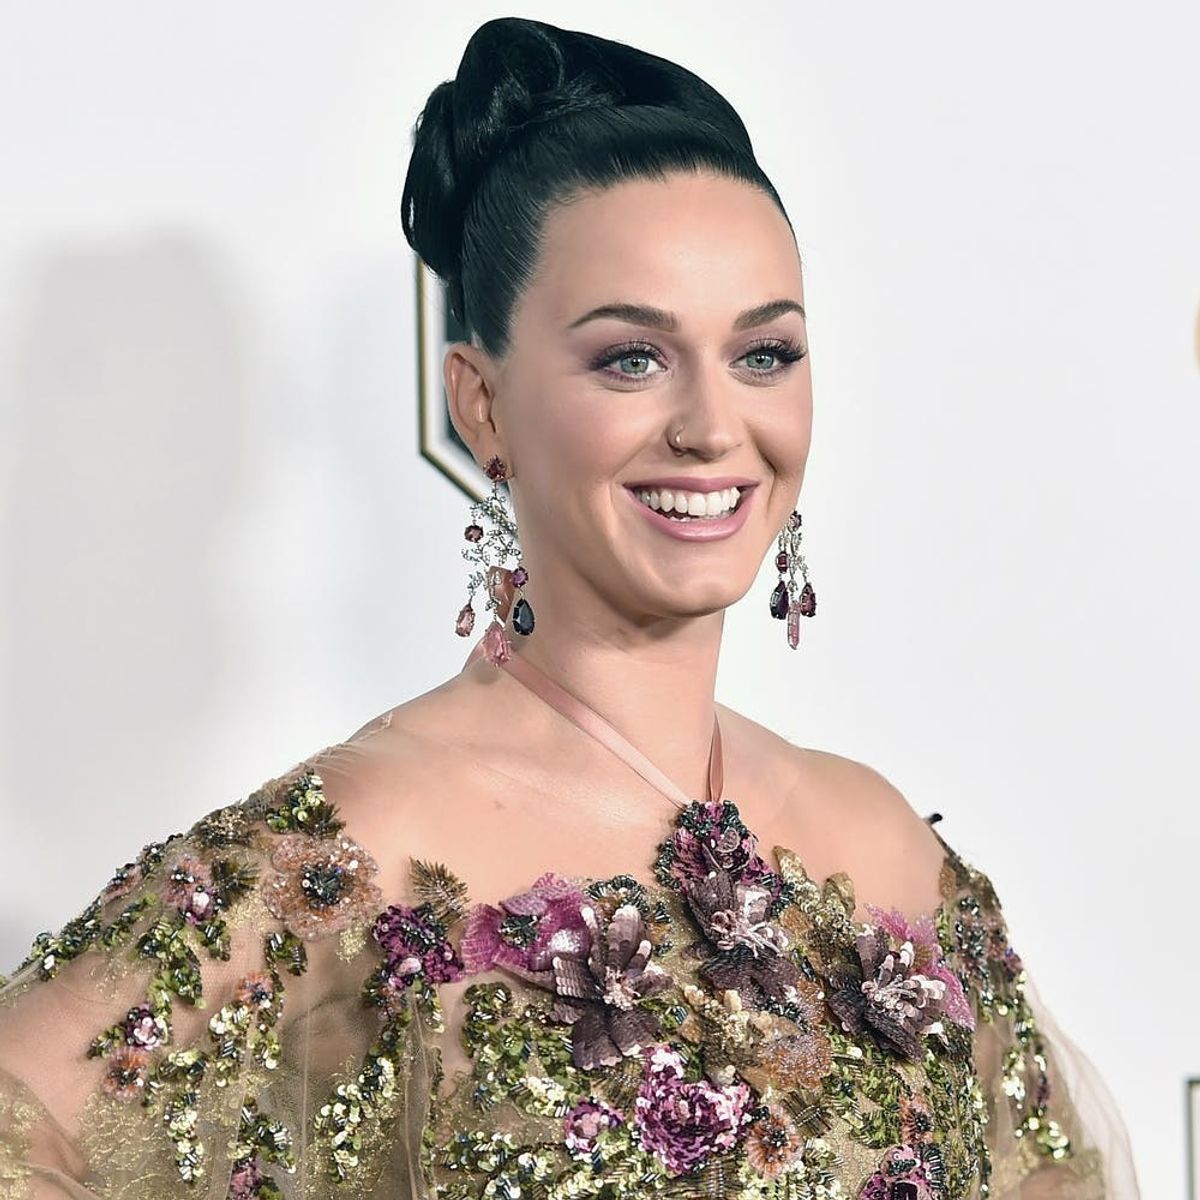 Katy Perry’s Reasoning for Donating 10K to Planned Parenthood Will Give You All the Feels